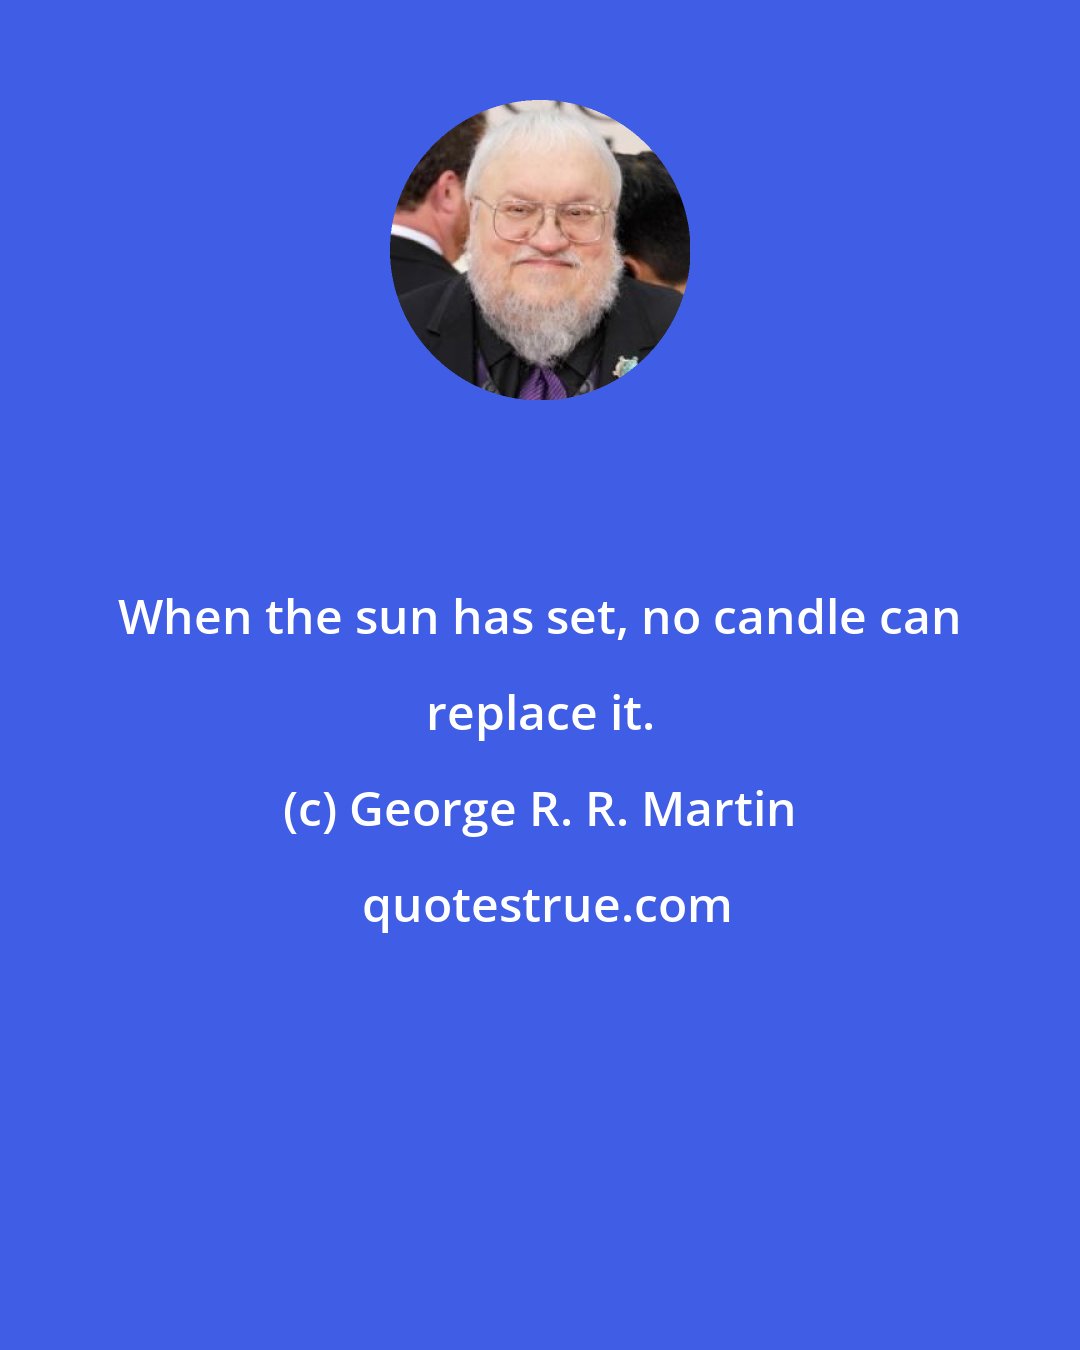 George R. R. Martin: When the sun has set, no candle can replace it.